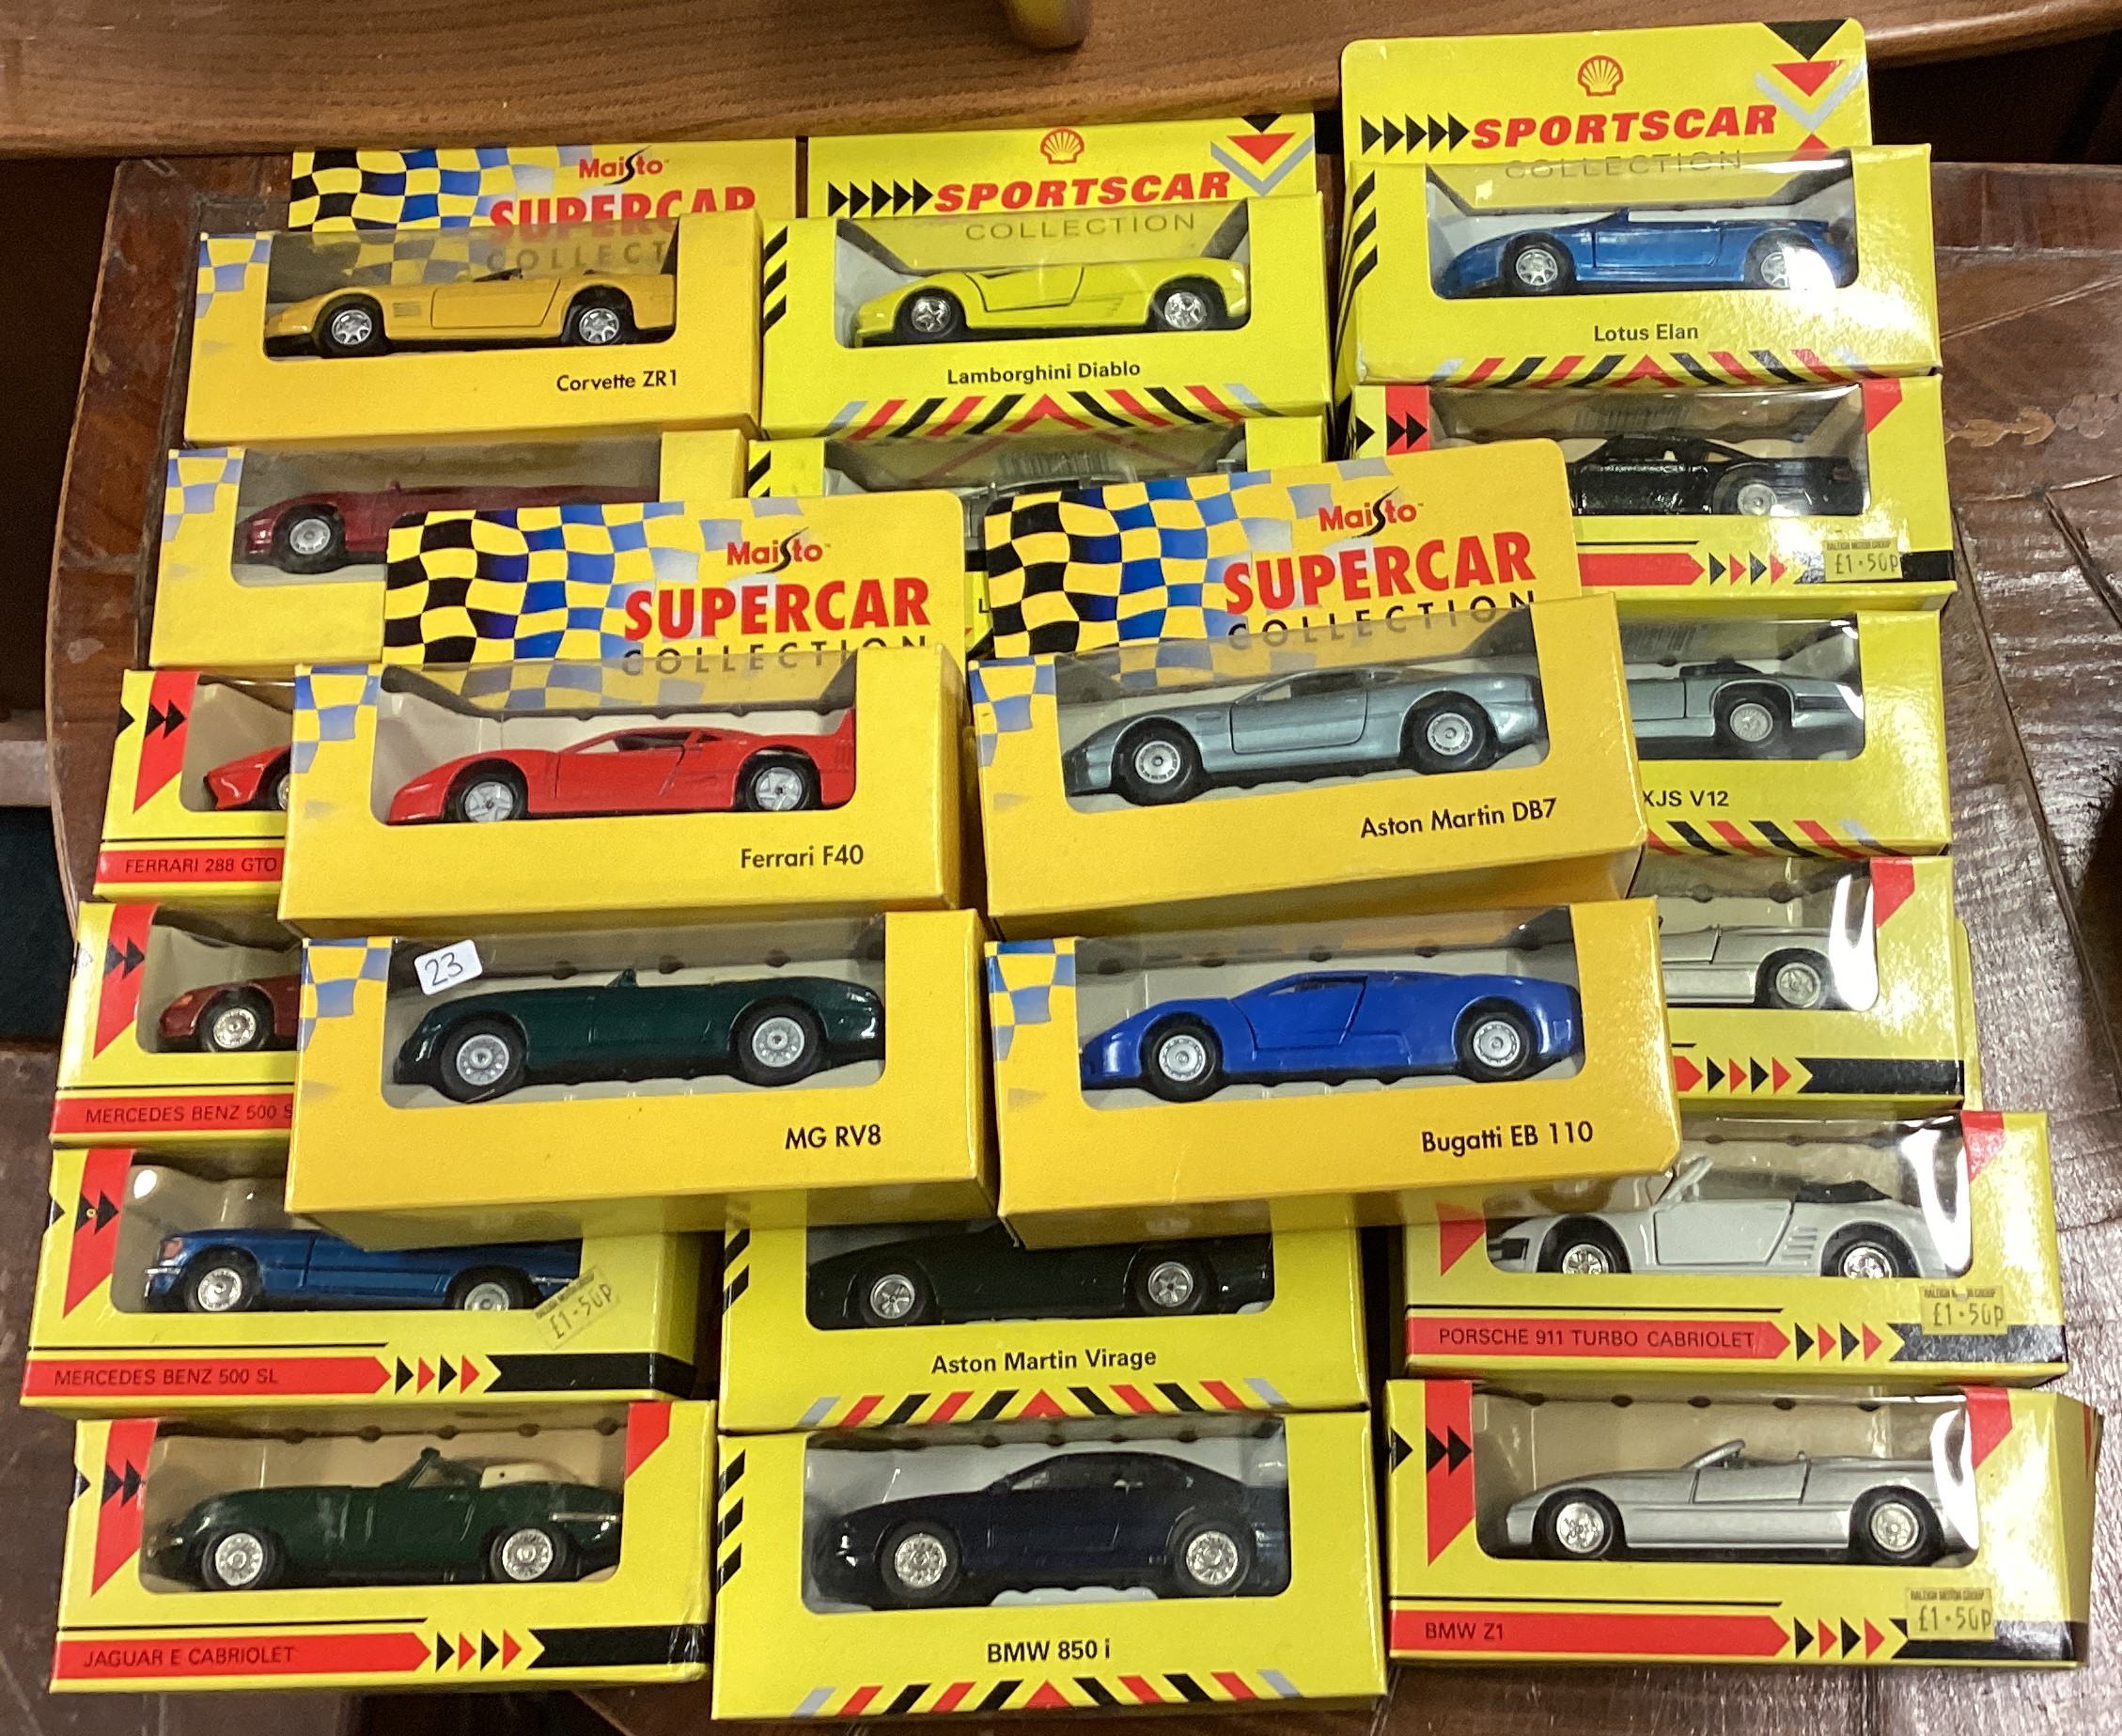 A large collection of toy cars.